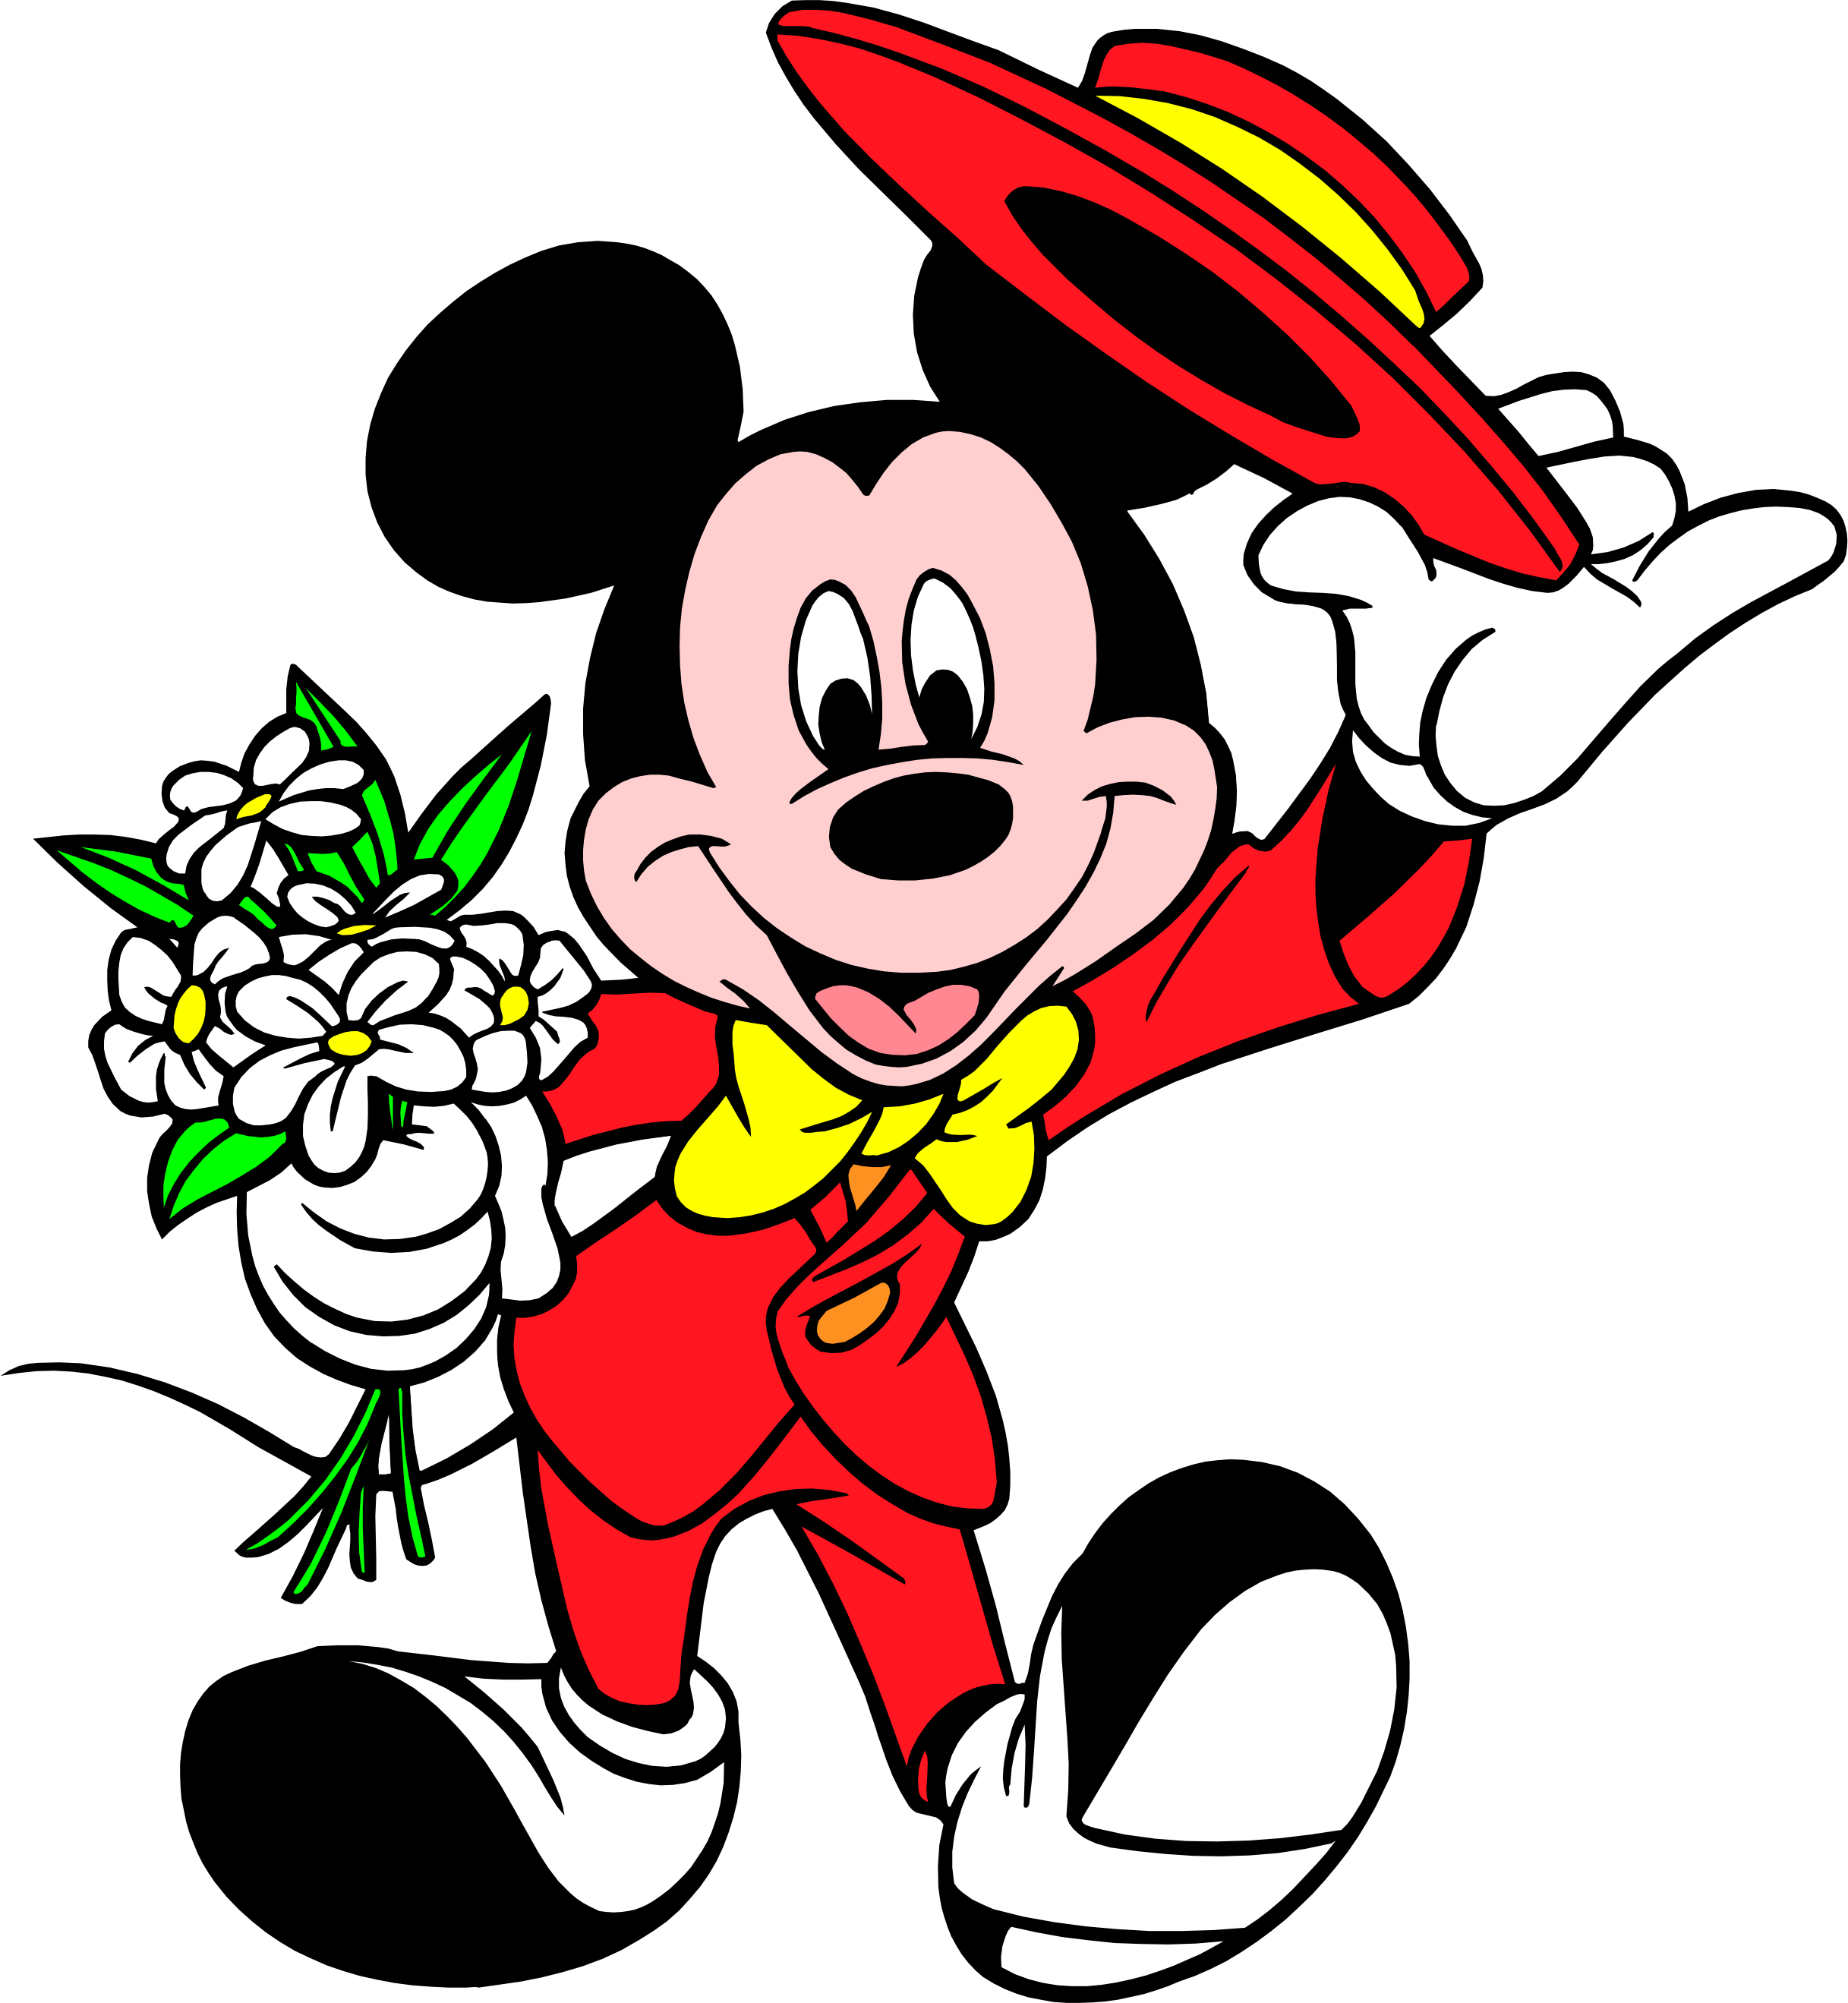 Judge clipart happy. Mickey mouse by convitex